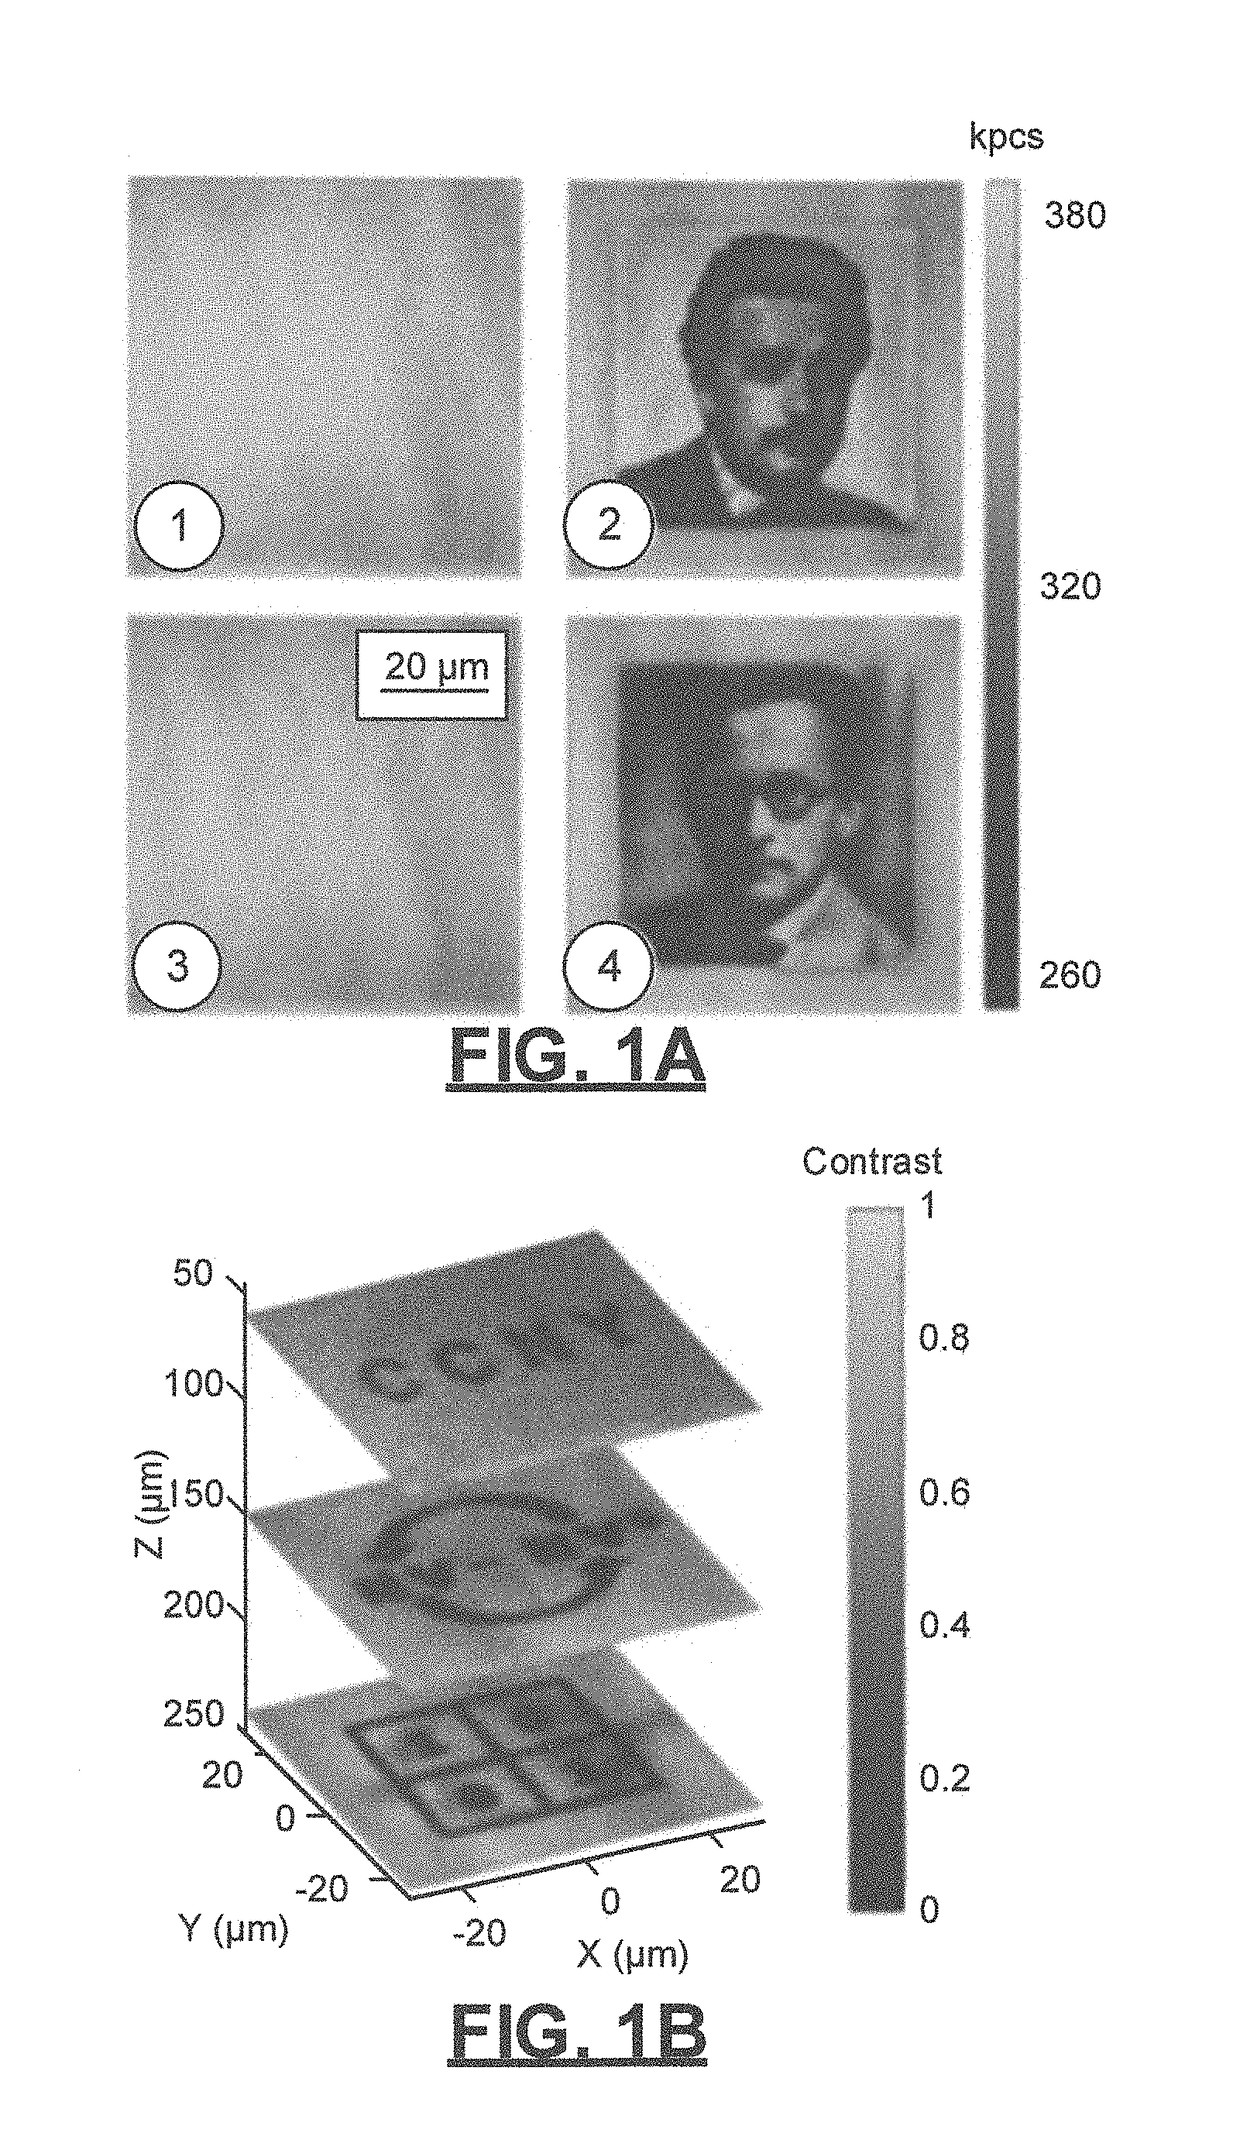 Method for ultra-dense data storage via optically-controllable paramagnetic centers